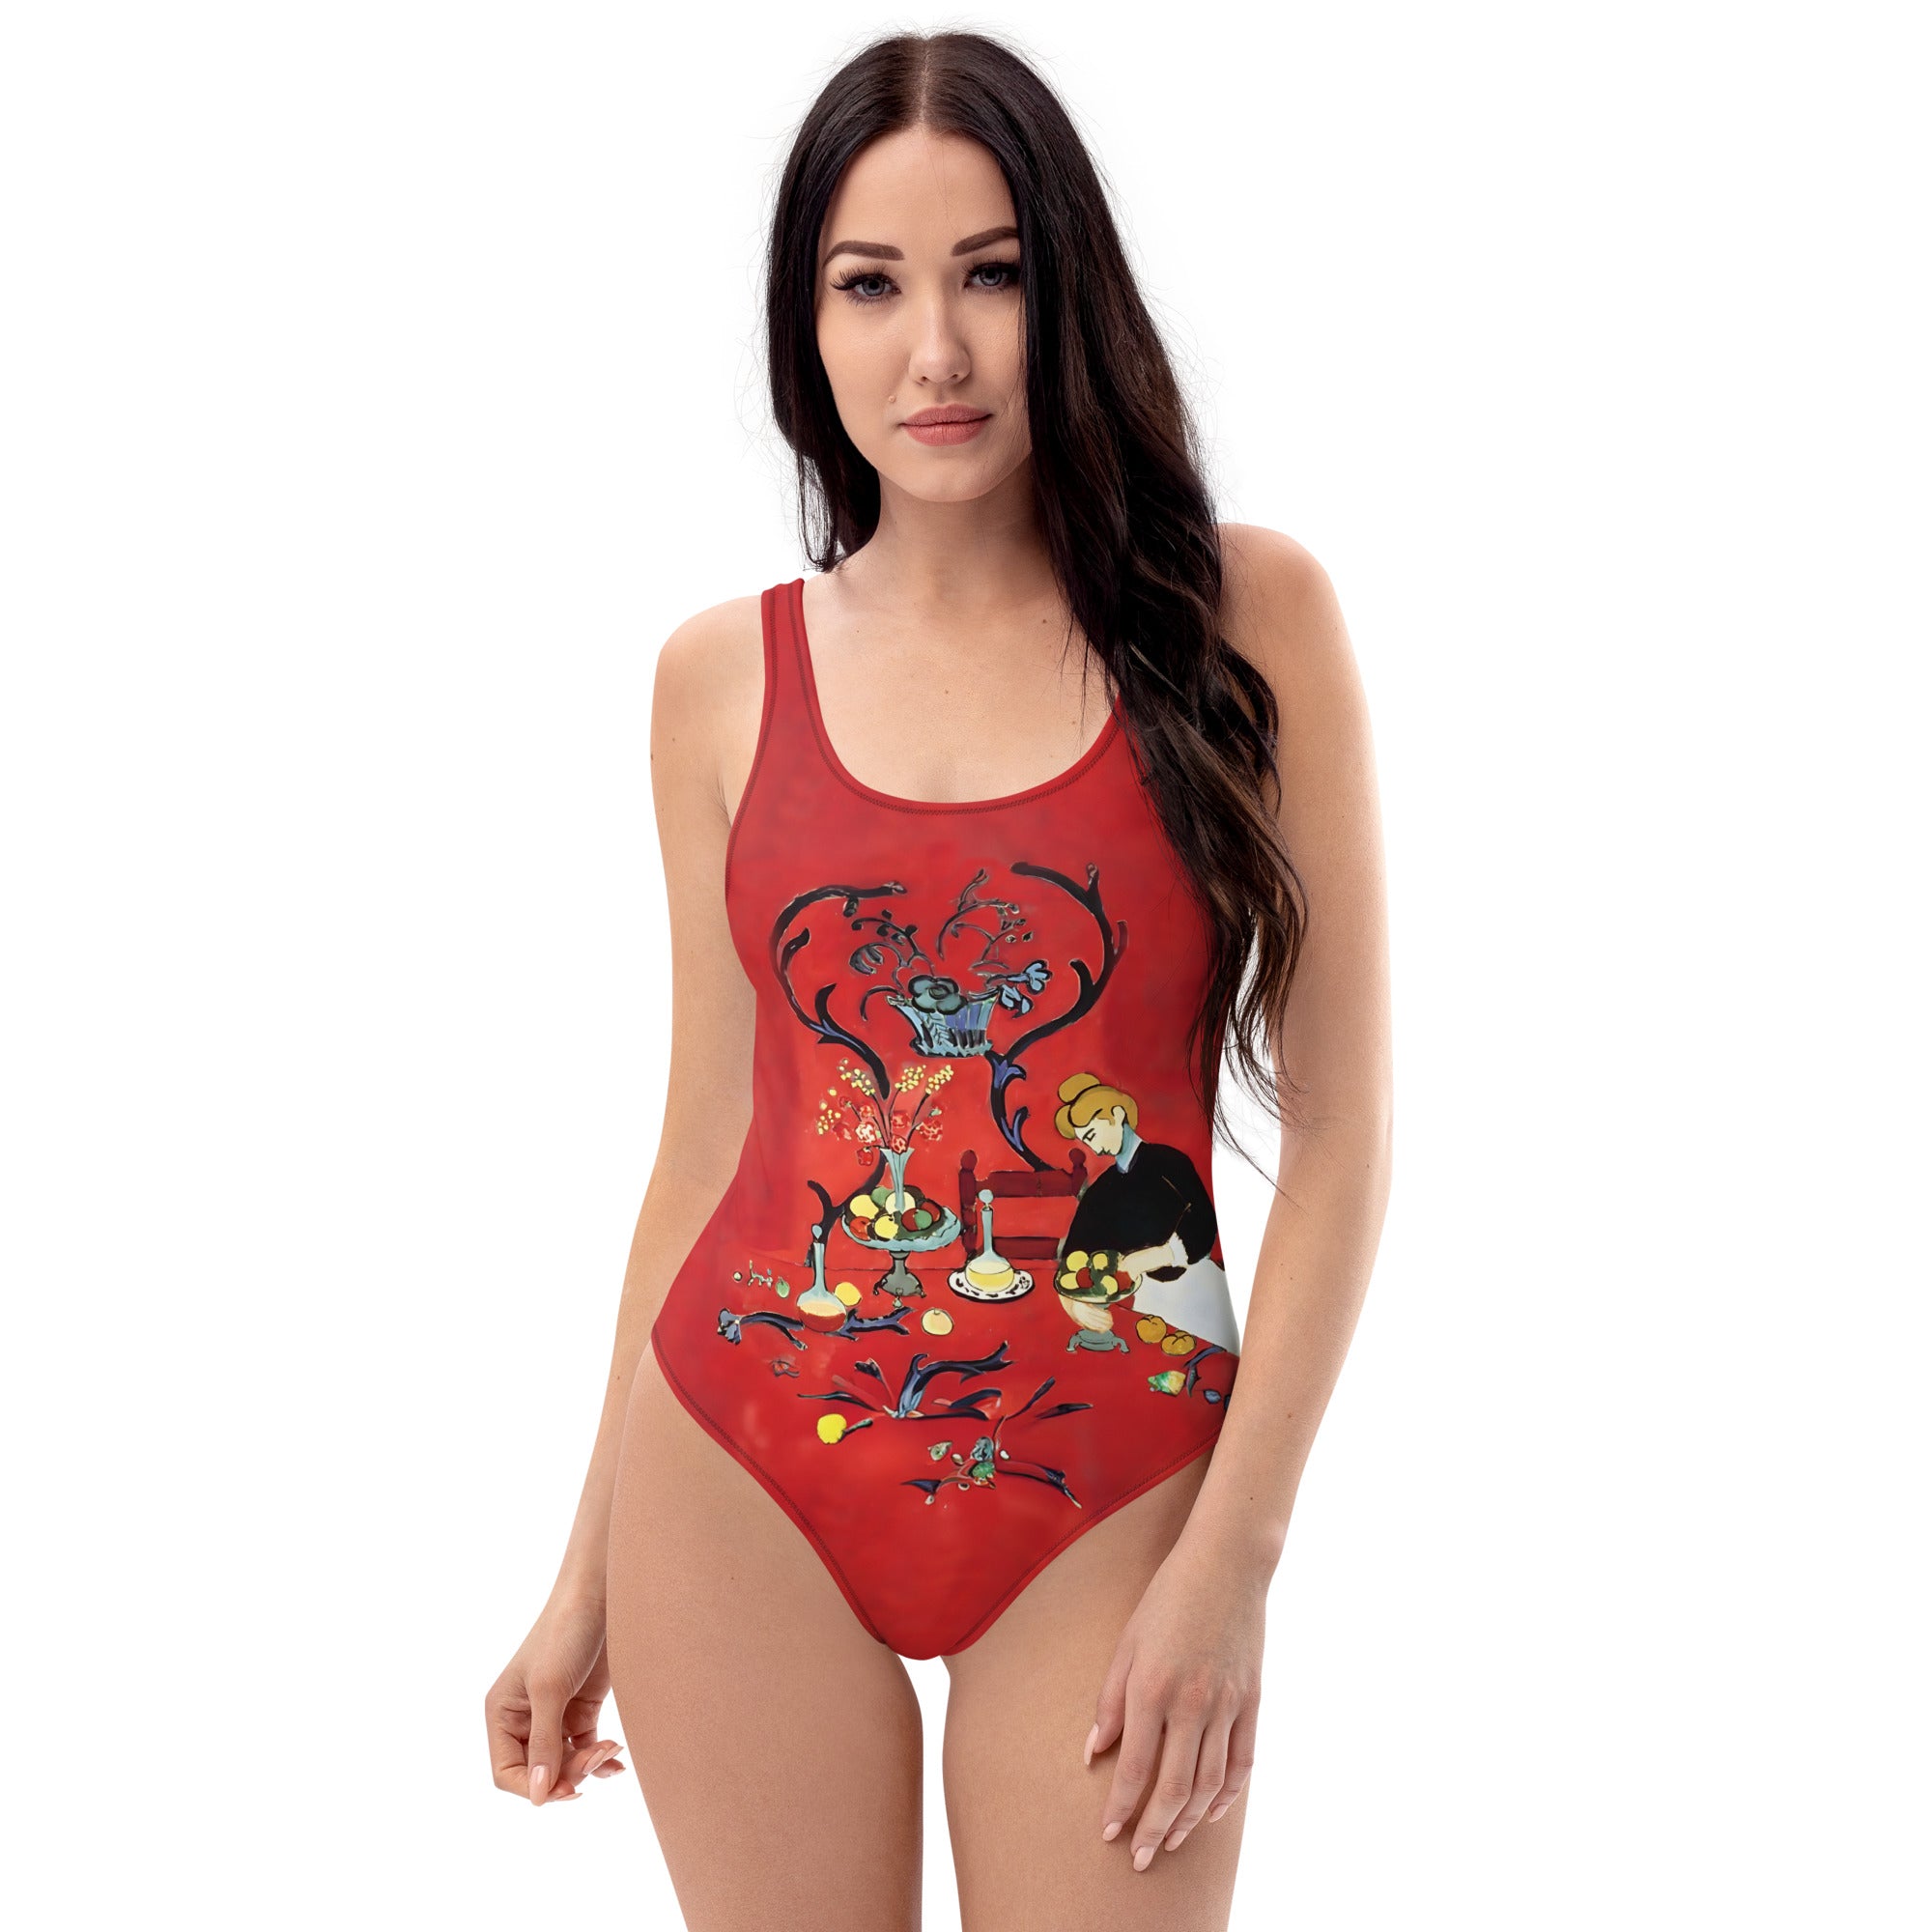 Henri Matisse ‘The Red Room’ Famous Painting Swimsuit | Premium Art One Piece Swimsuit